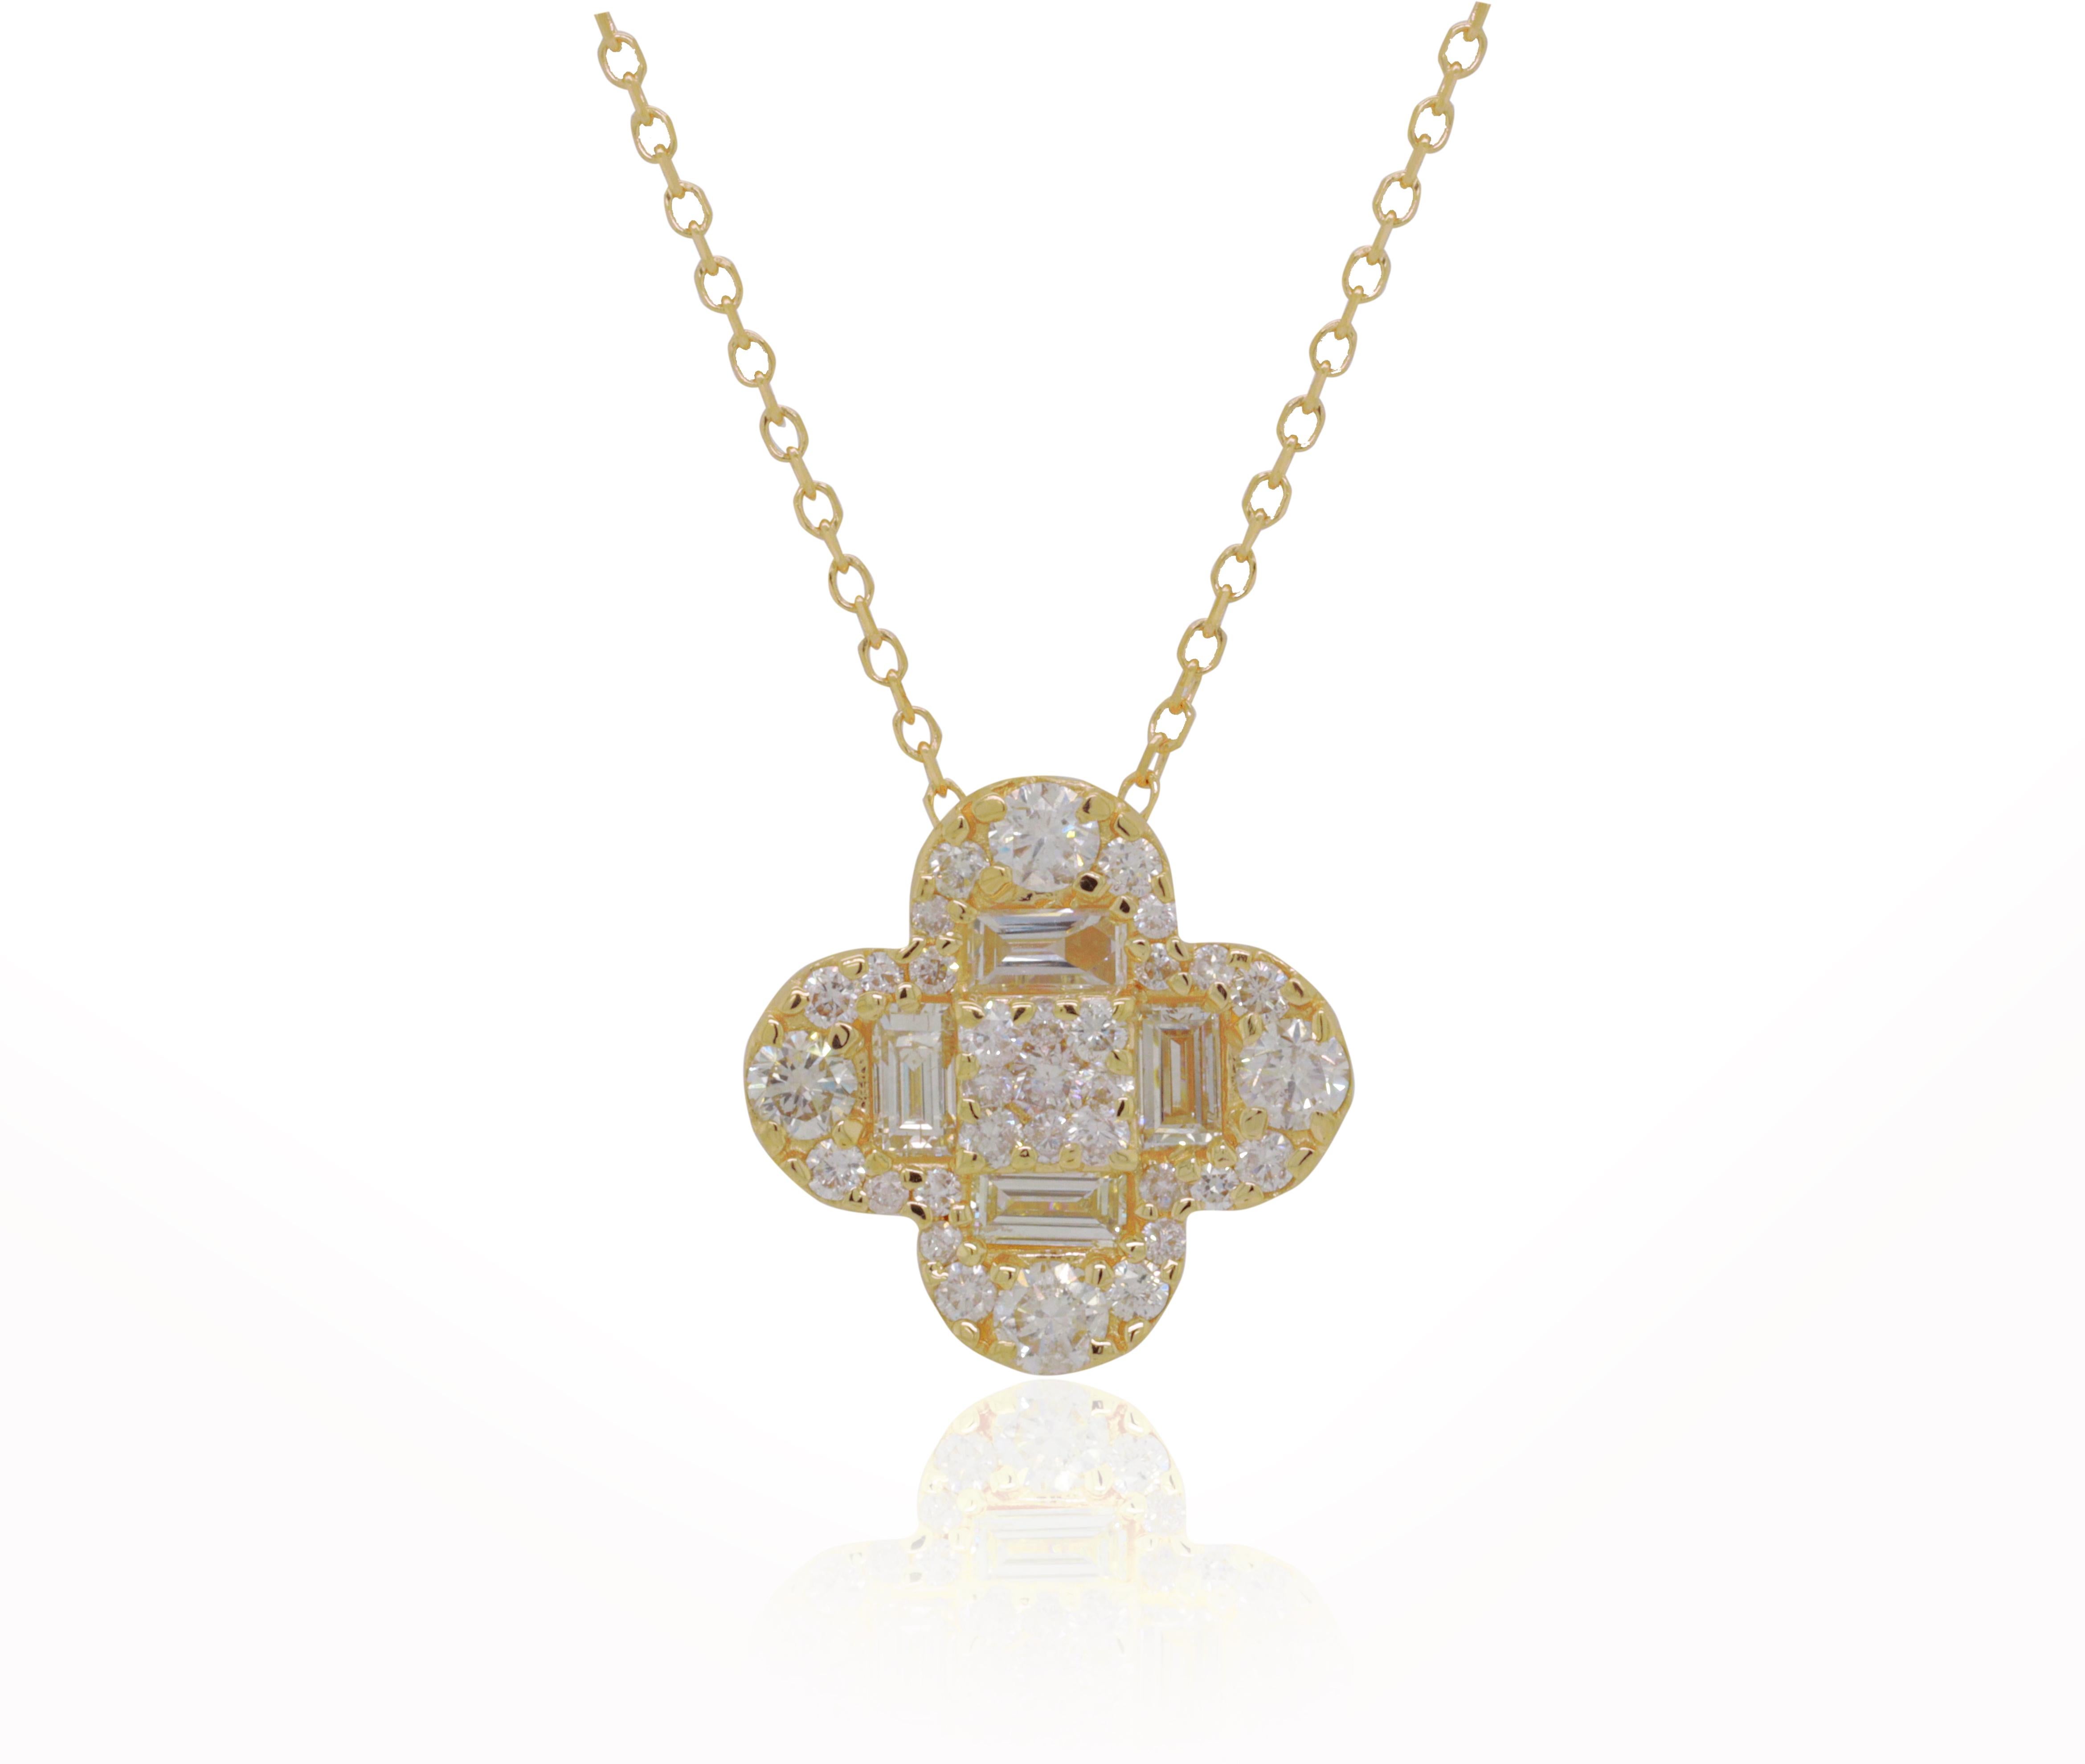 14 kt yellow gold diamond pendant with clover-shaped design adorned with 0.70 cts tw diamonds
Diana M. is a leading supplier of top-quality fine jewelry for over 35 years.
Diana M is one-stop shop for all your jewelry shopping, carrying line of